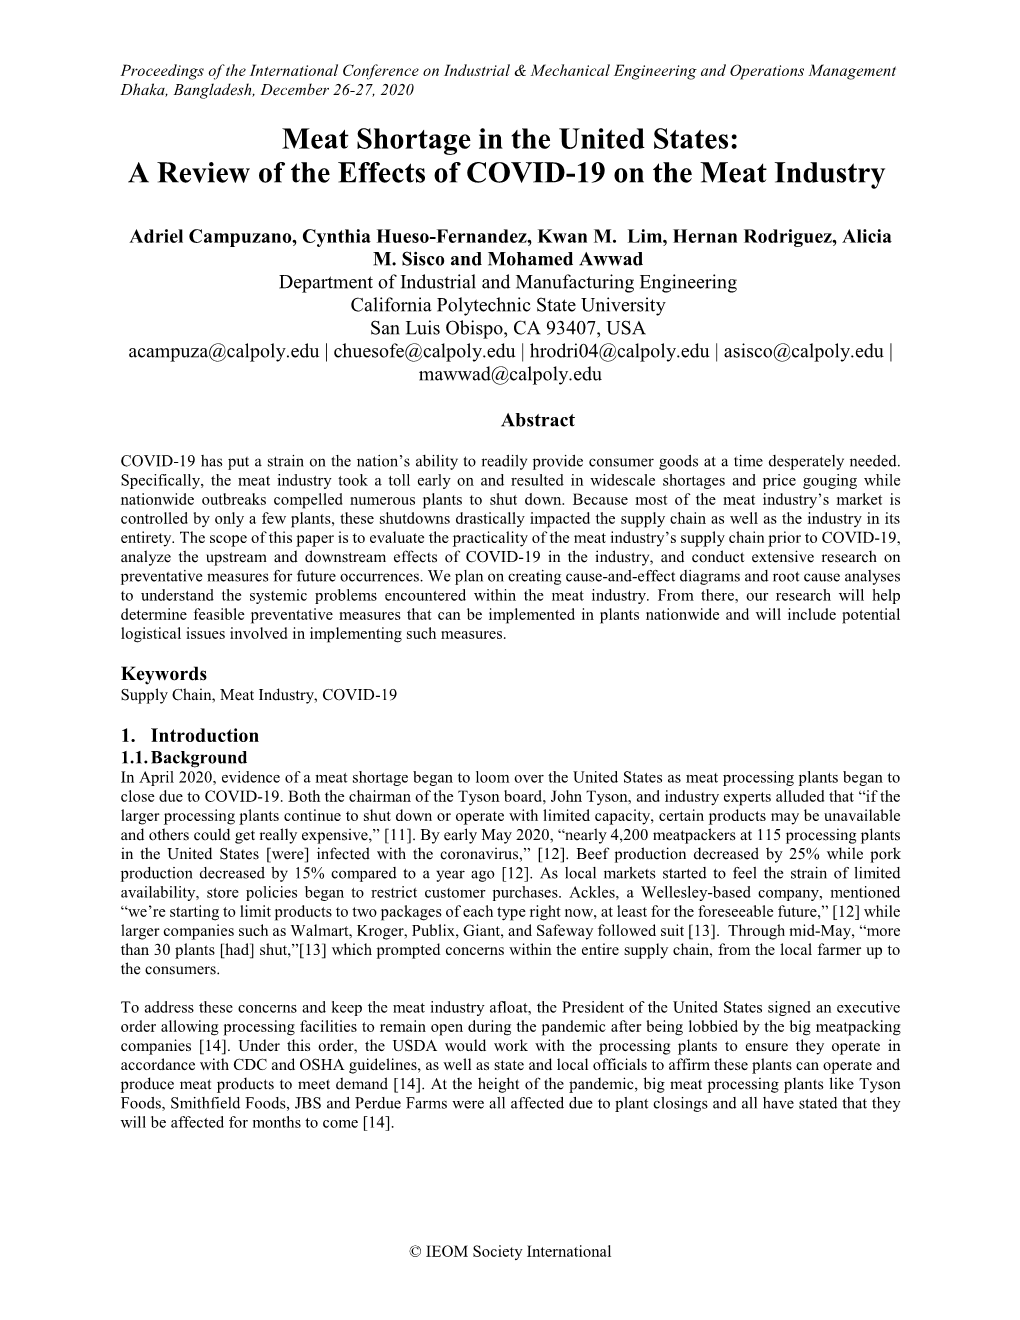 ID 155 Meat Shortage in the United States: a Review of the Effects Of